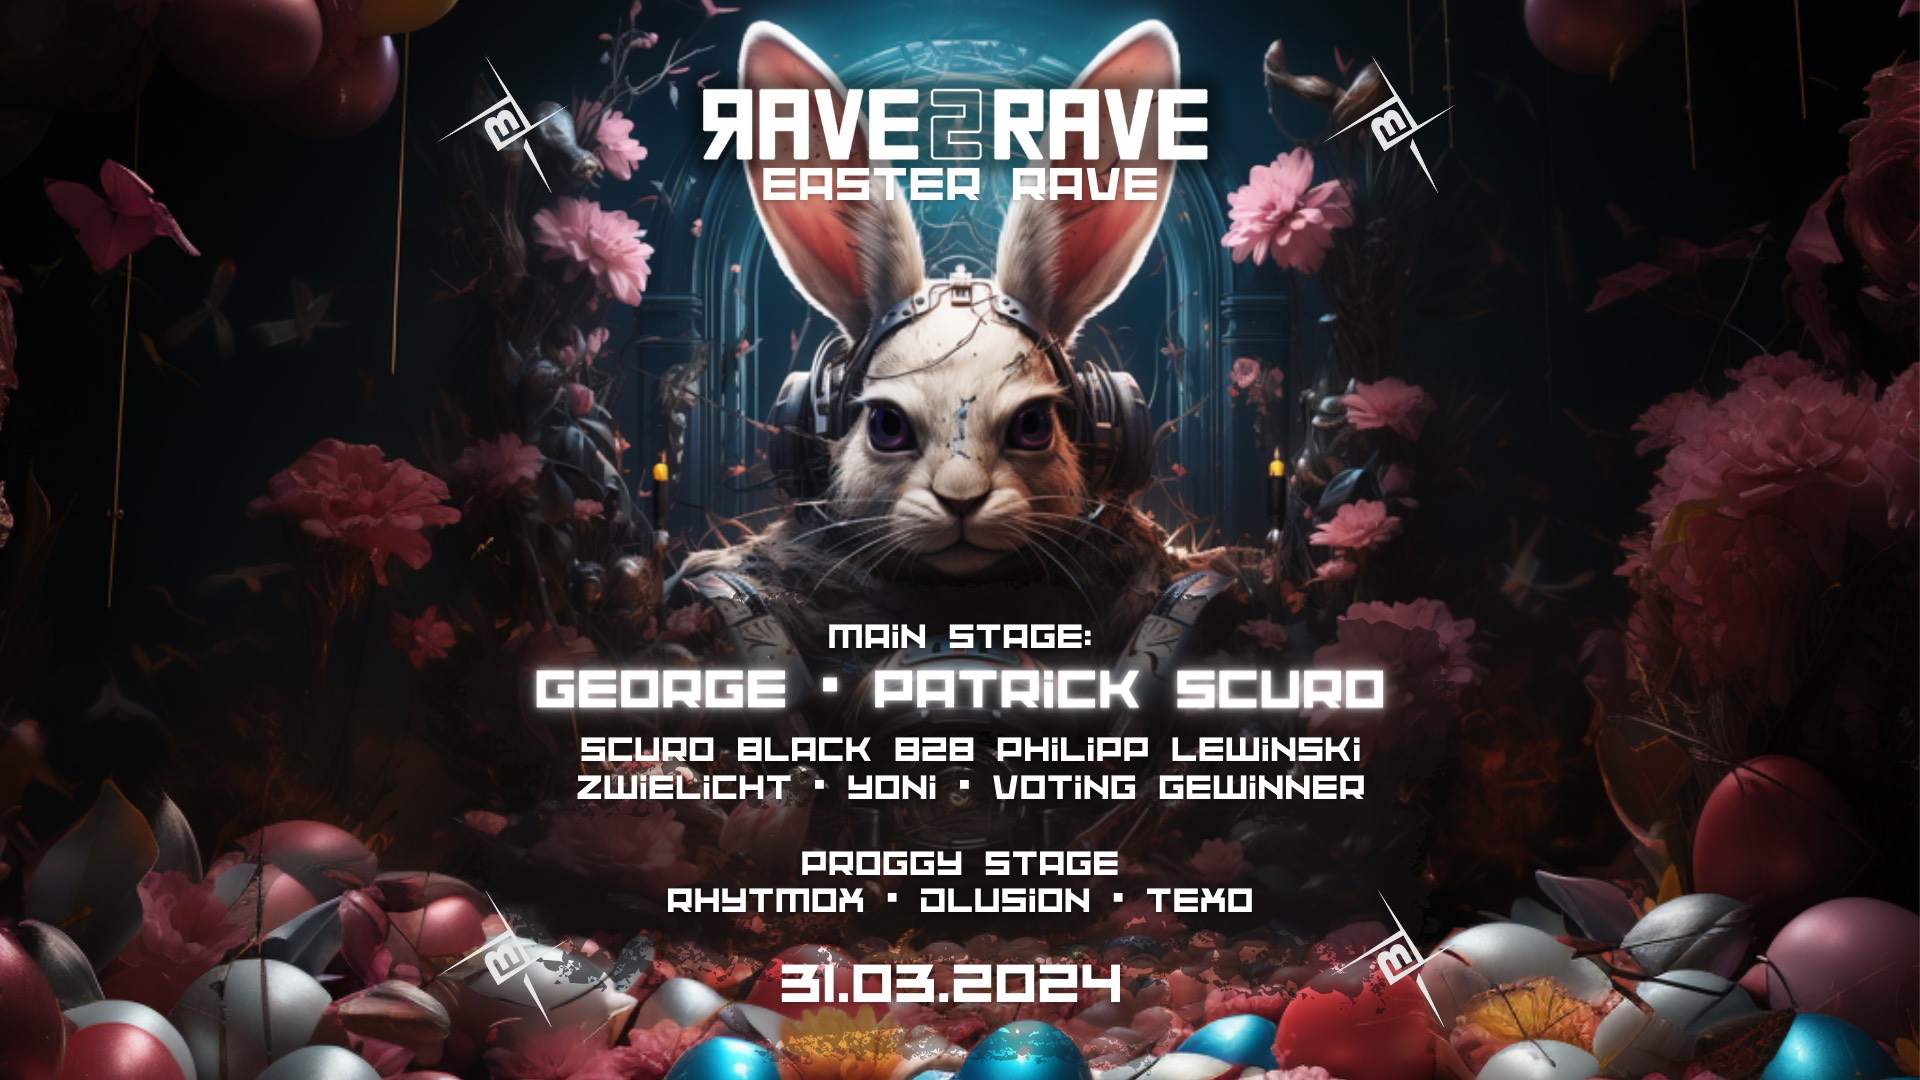 Rave2Rave - Easter Rave with George, Patrick Scuro and many more - フライヤー表